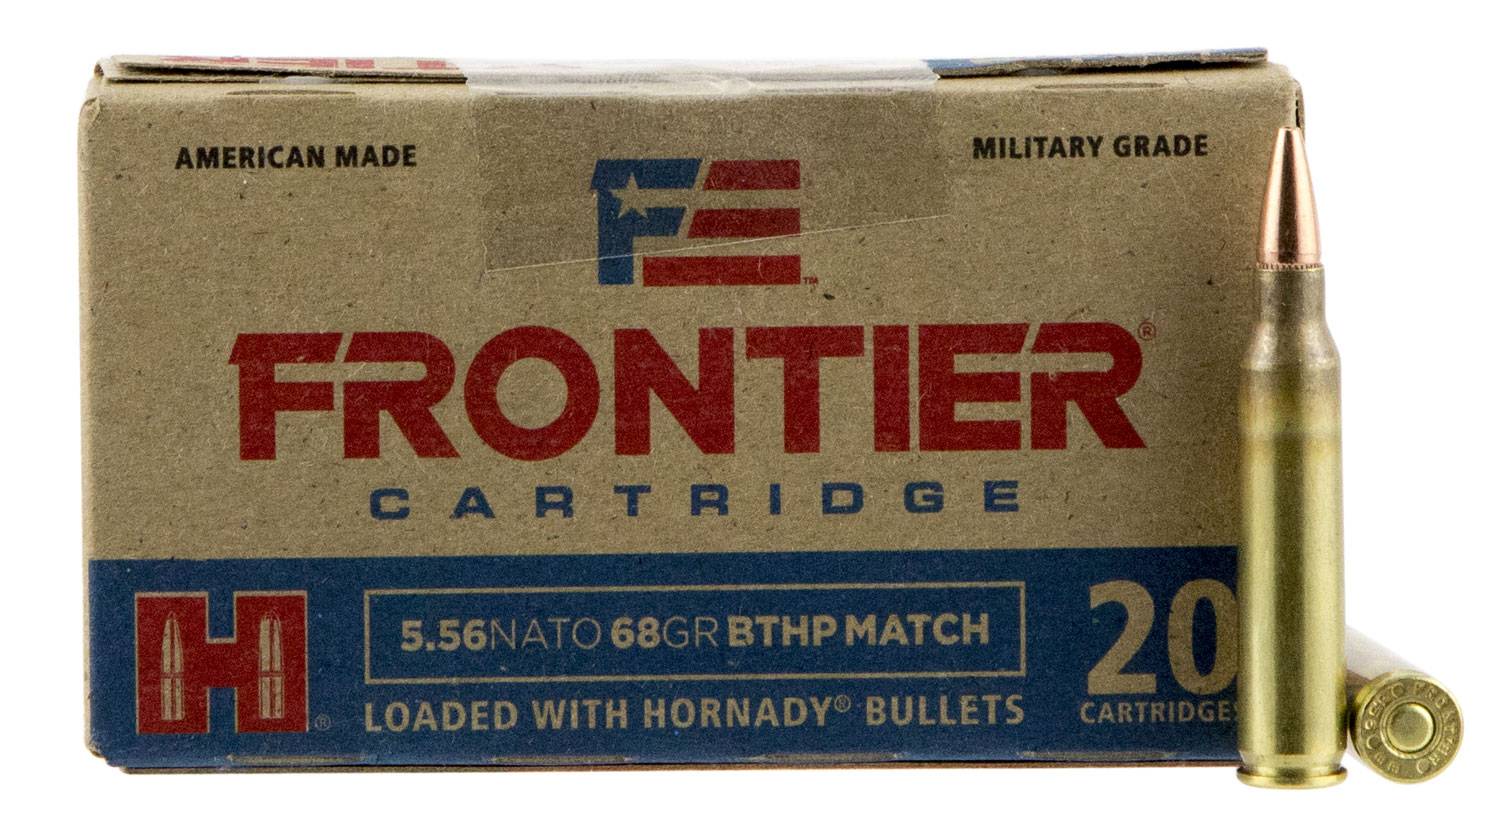 Hornady Frontier Cartridge Fr310 Rifle 556 Nato 68 Gr Boat Tail Hollow Point Match 20 Bx